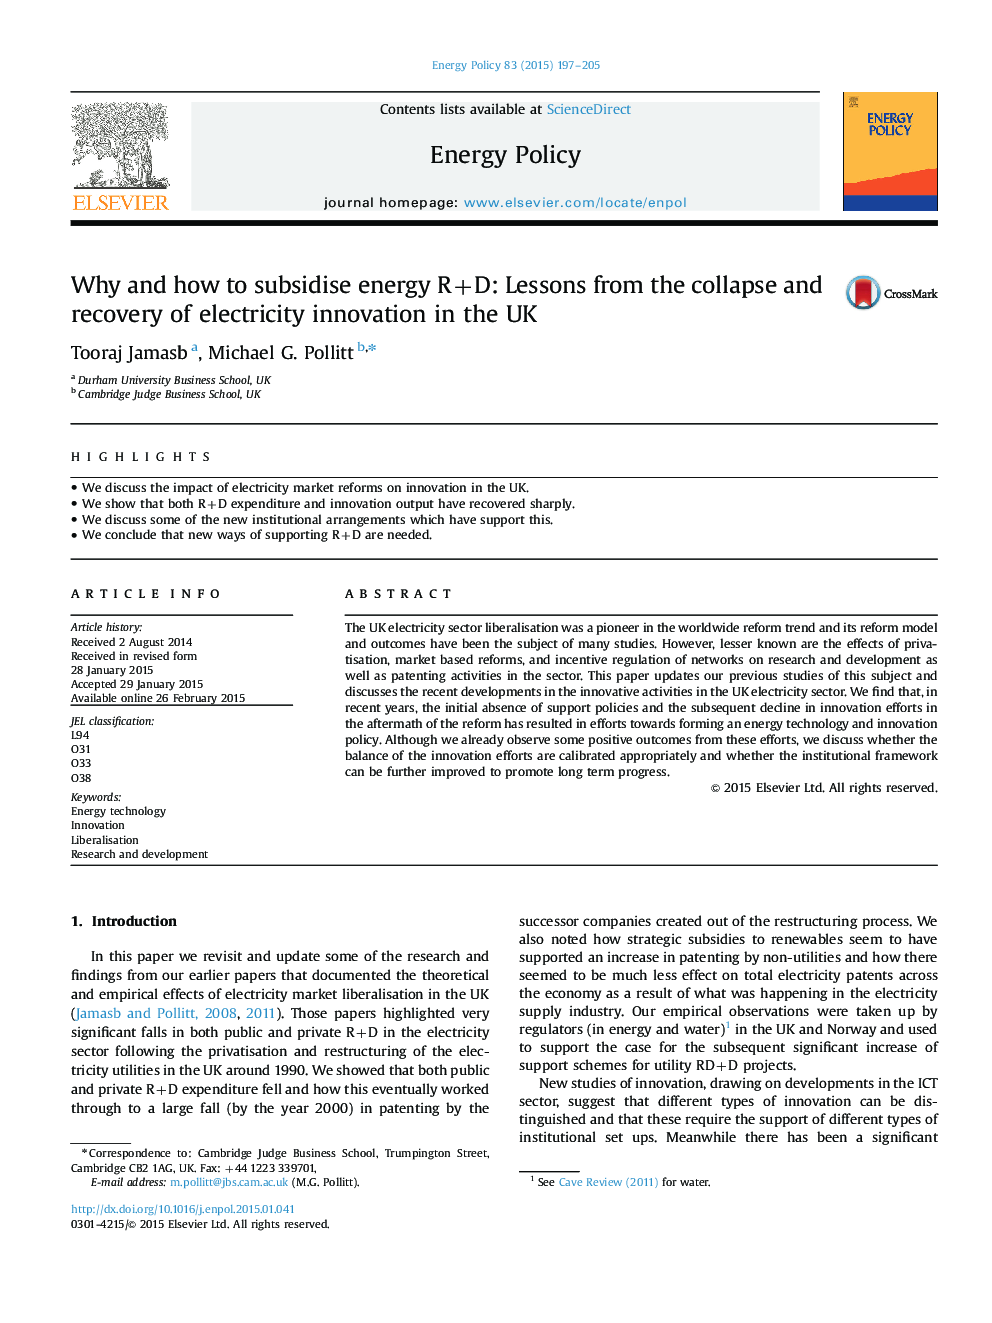 Why and how to subsidise energy R+D: Lessons from the collapse and recovery of electricity innovation in the UK